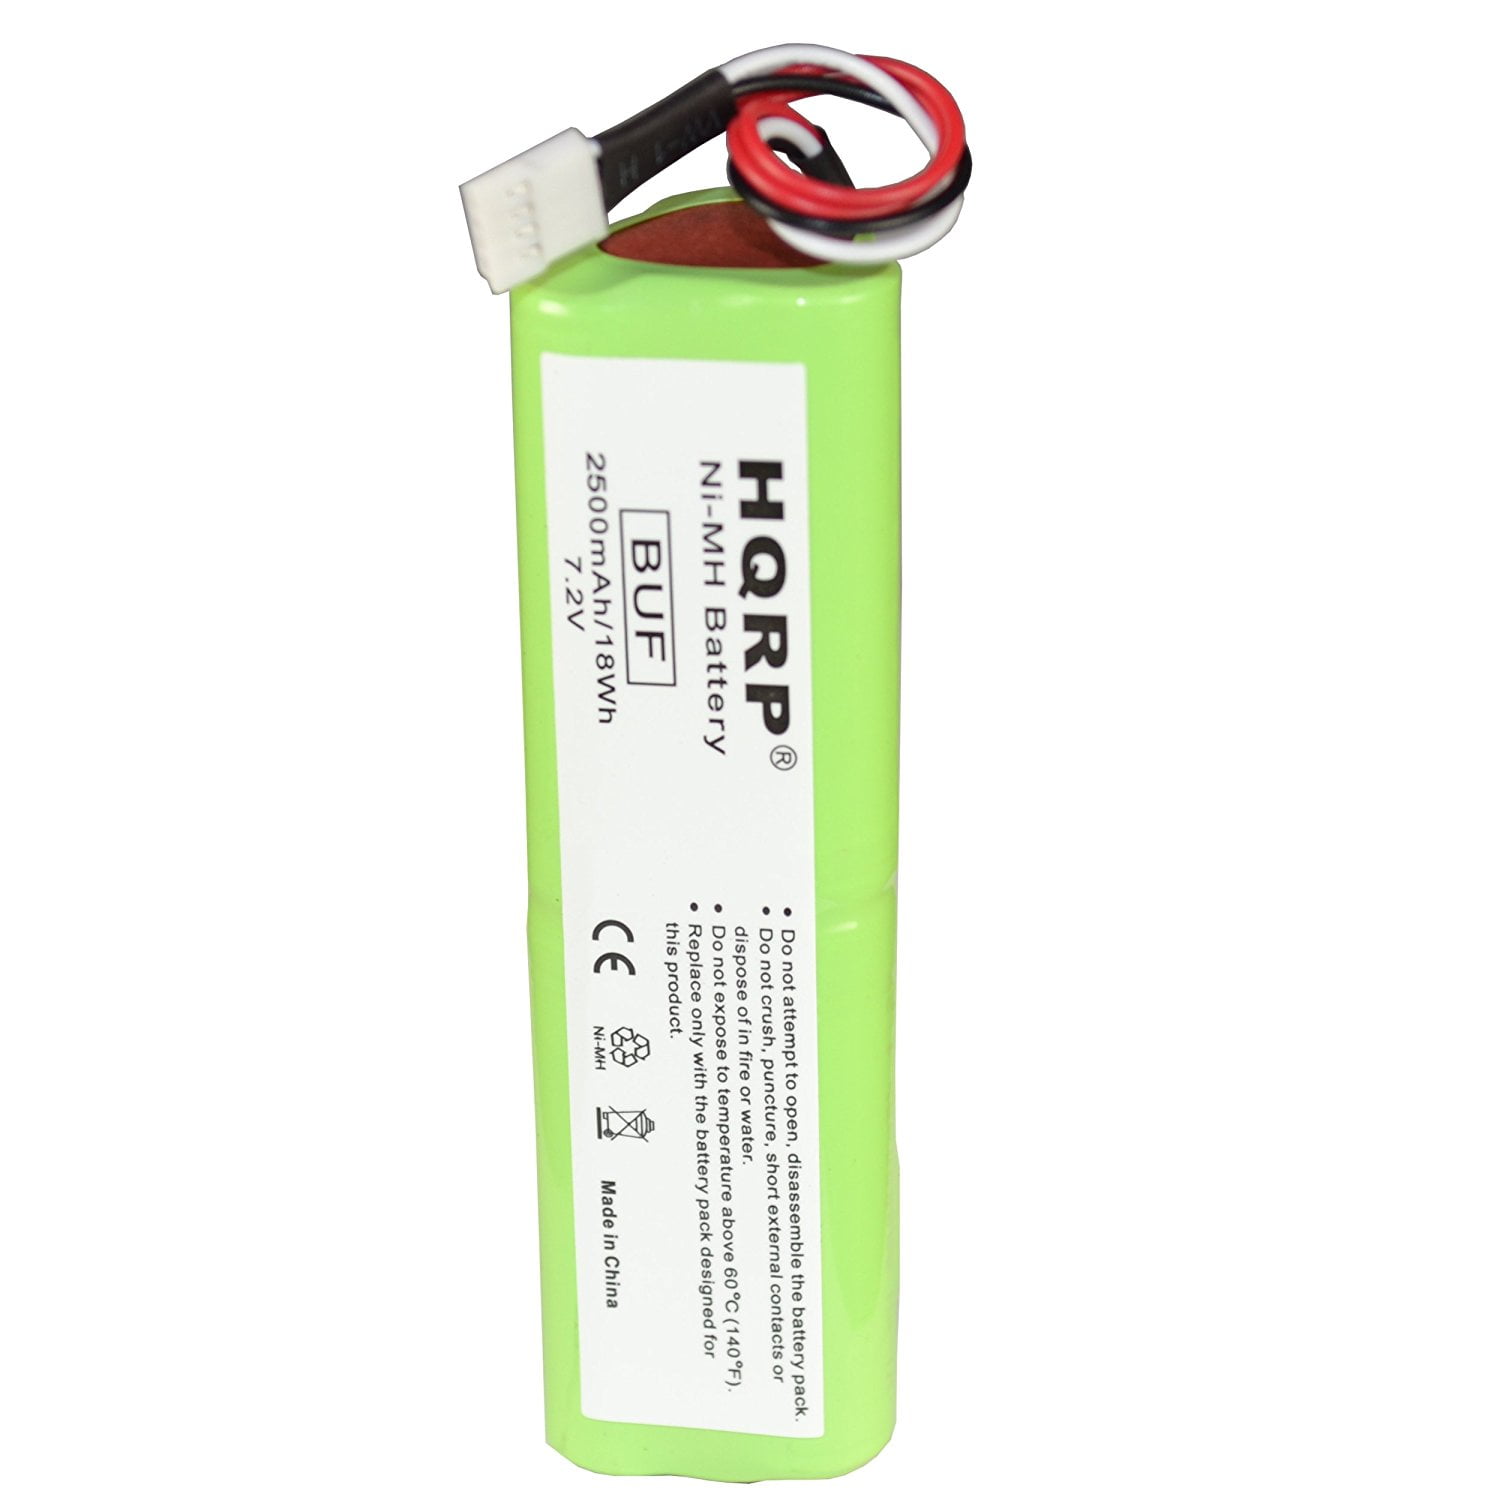 2500mAh Rechargeable Battery for FLUKE Ti Series Thermal Imager 2446641 3105035 